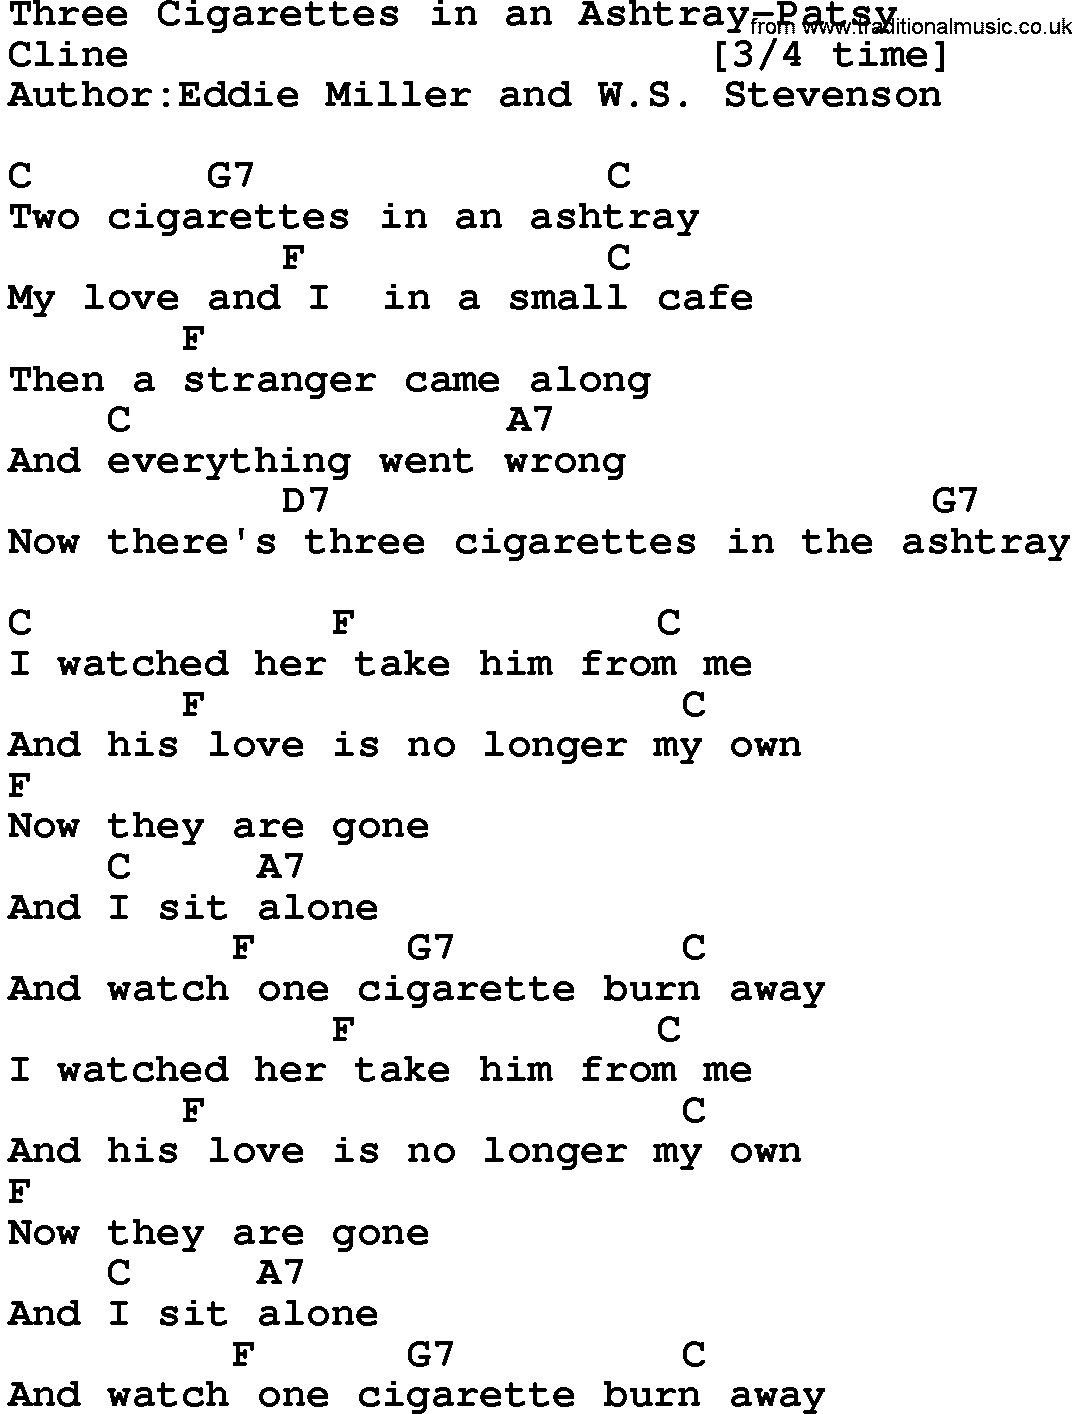 Country music song: Three Cigarettes In An Ashtray-Patsy lyrics and chords